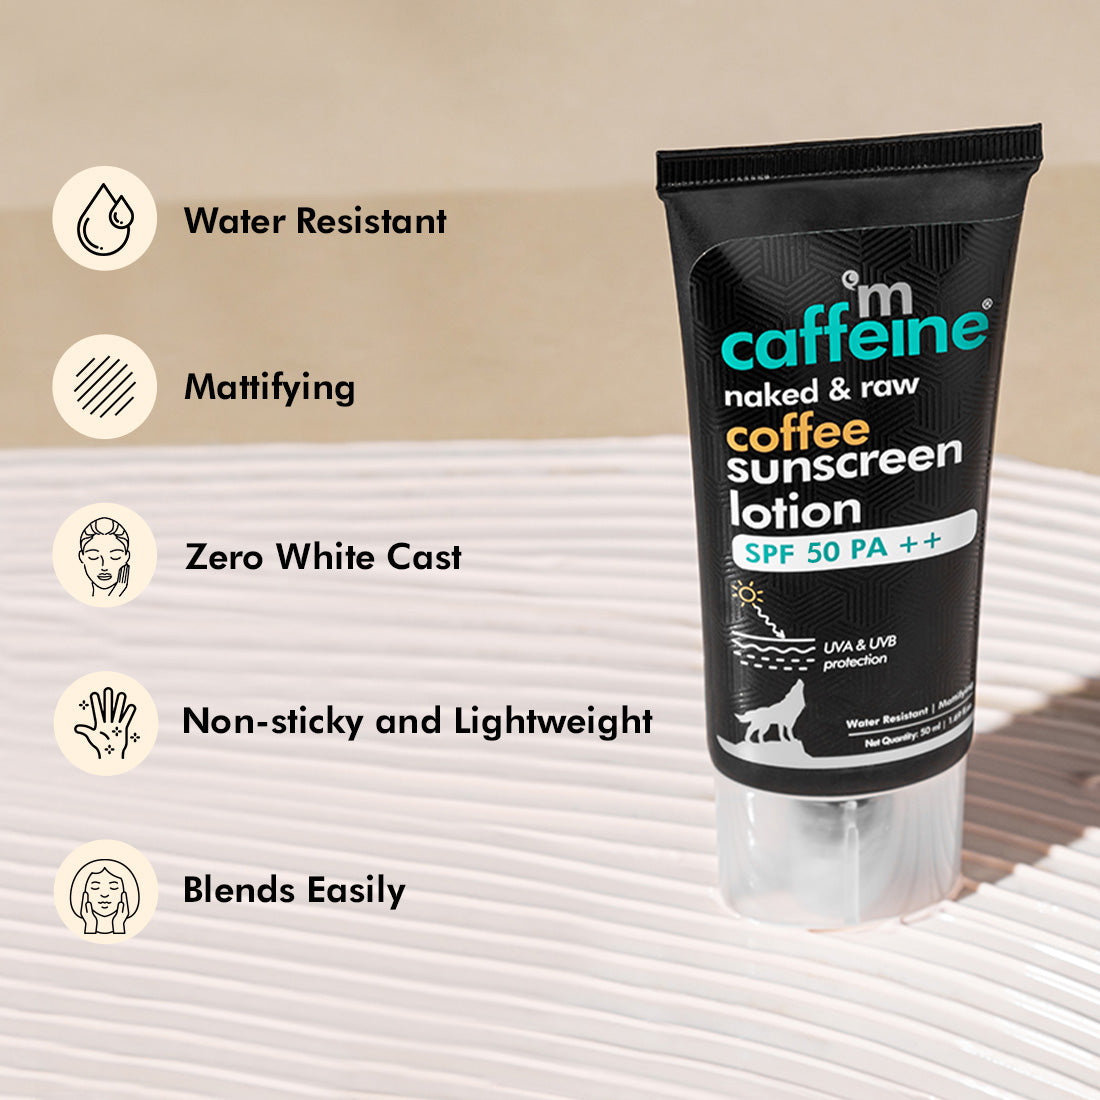 mCaffeine SPF 50 PA++ Coffee Sunscreen Lotion - Water-Resistant Matte Gel Cream with No White Cast